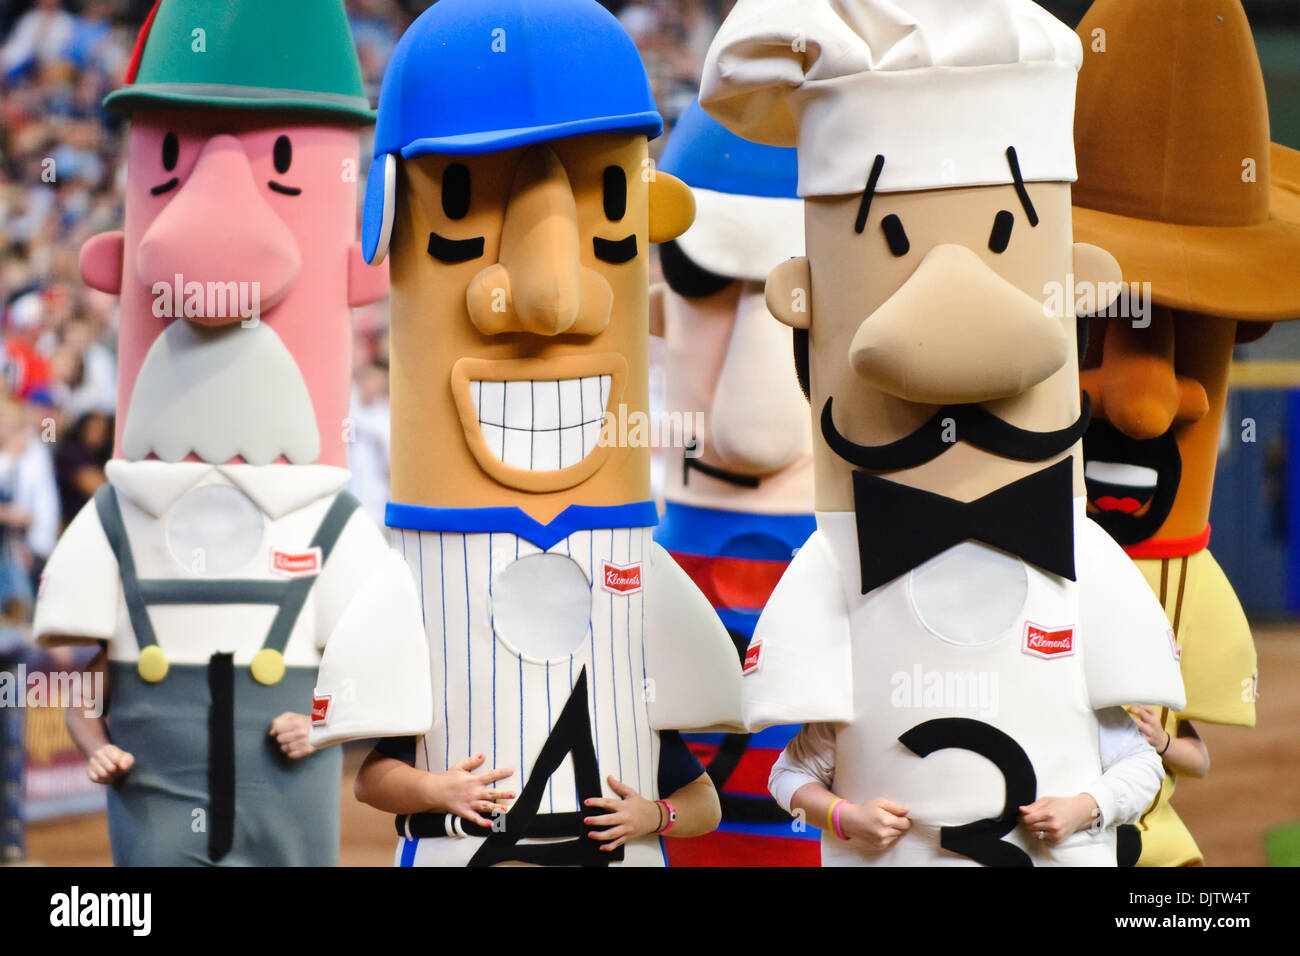 The racing sausages compete during the 7th inning stretch of the